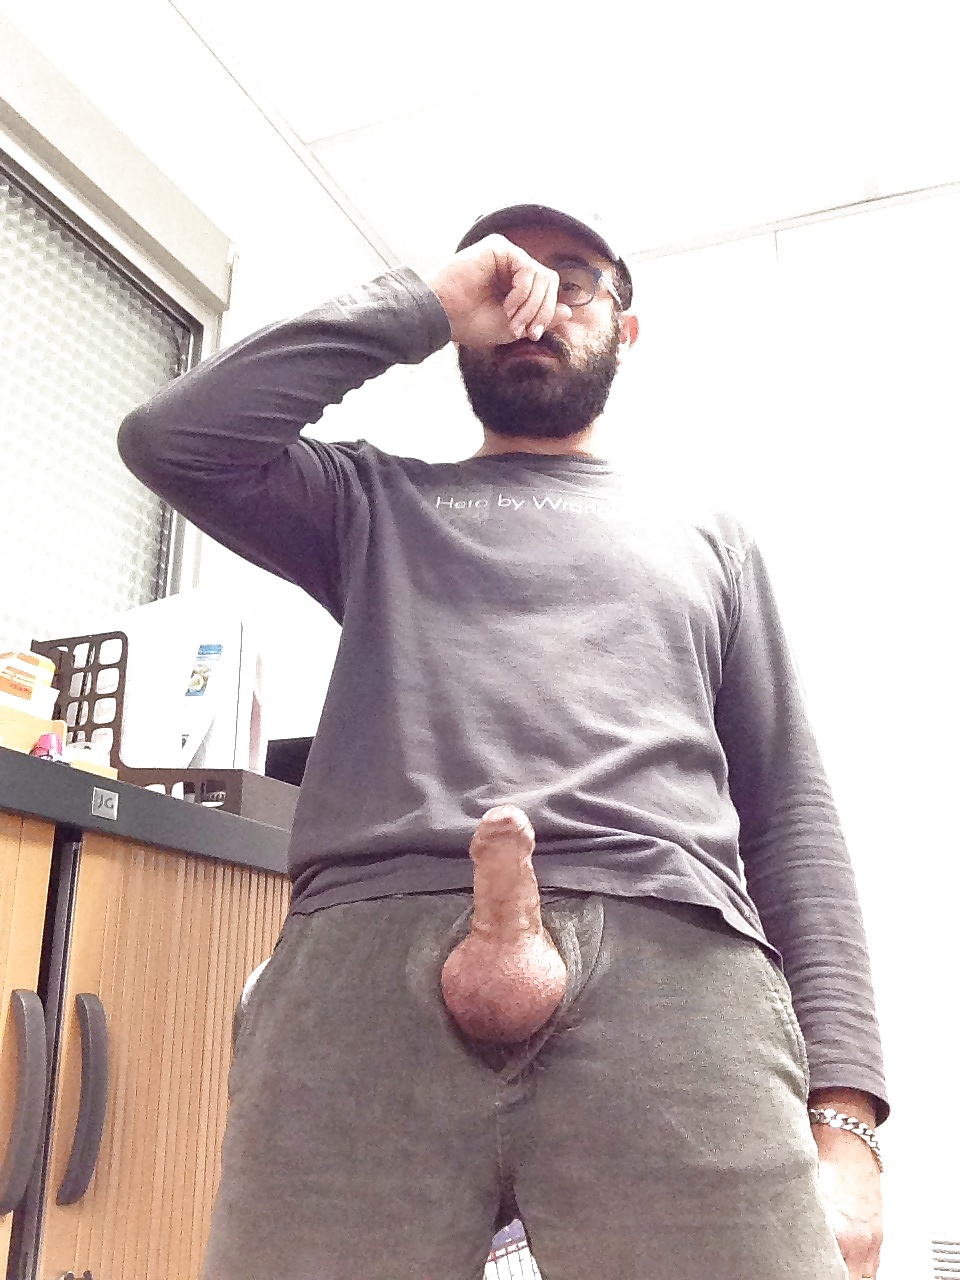 Me and my cock #27599851